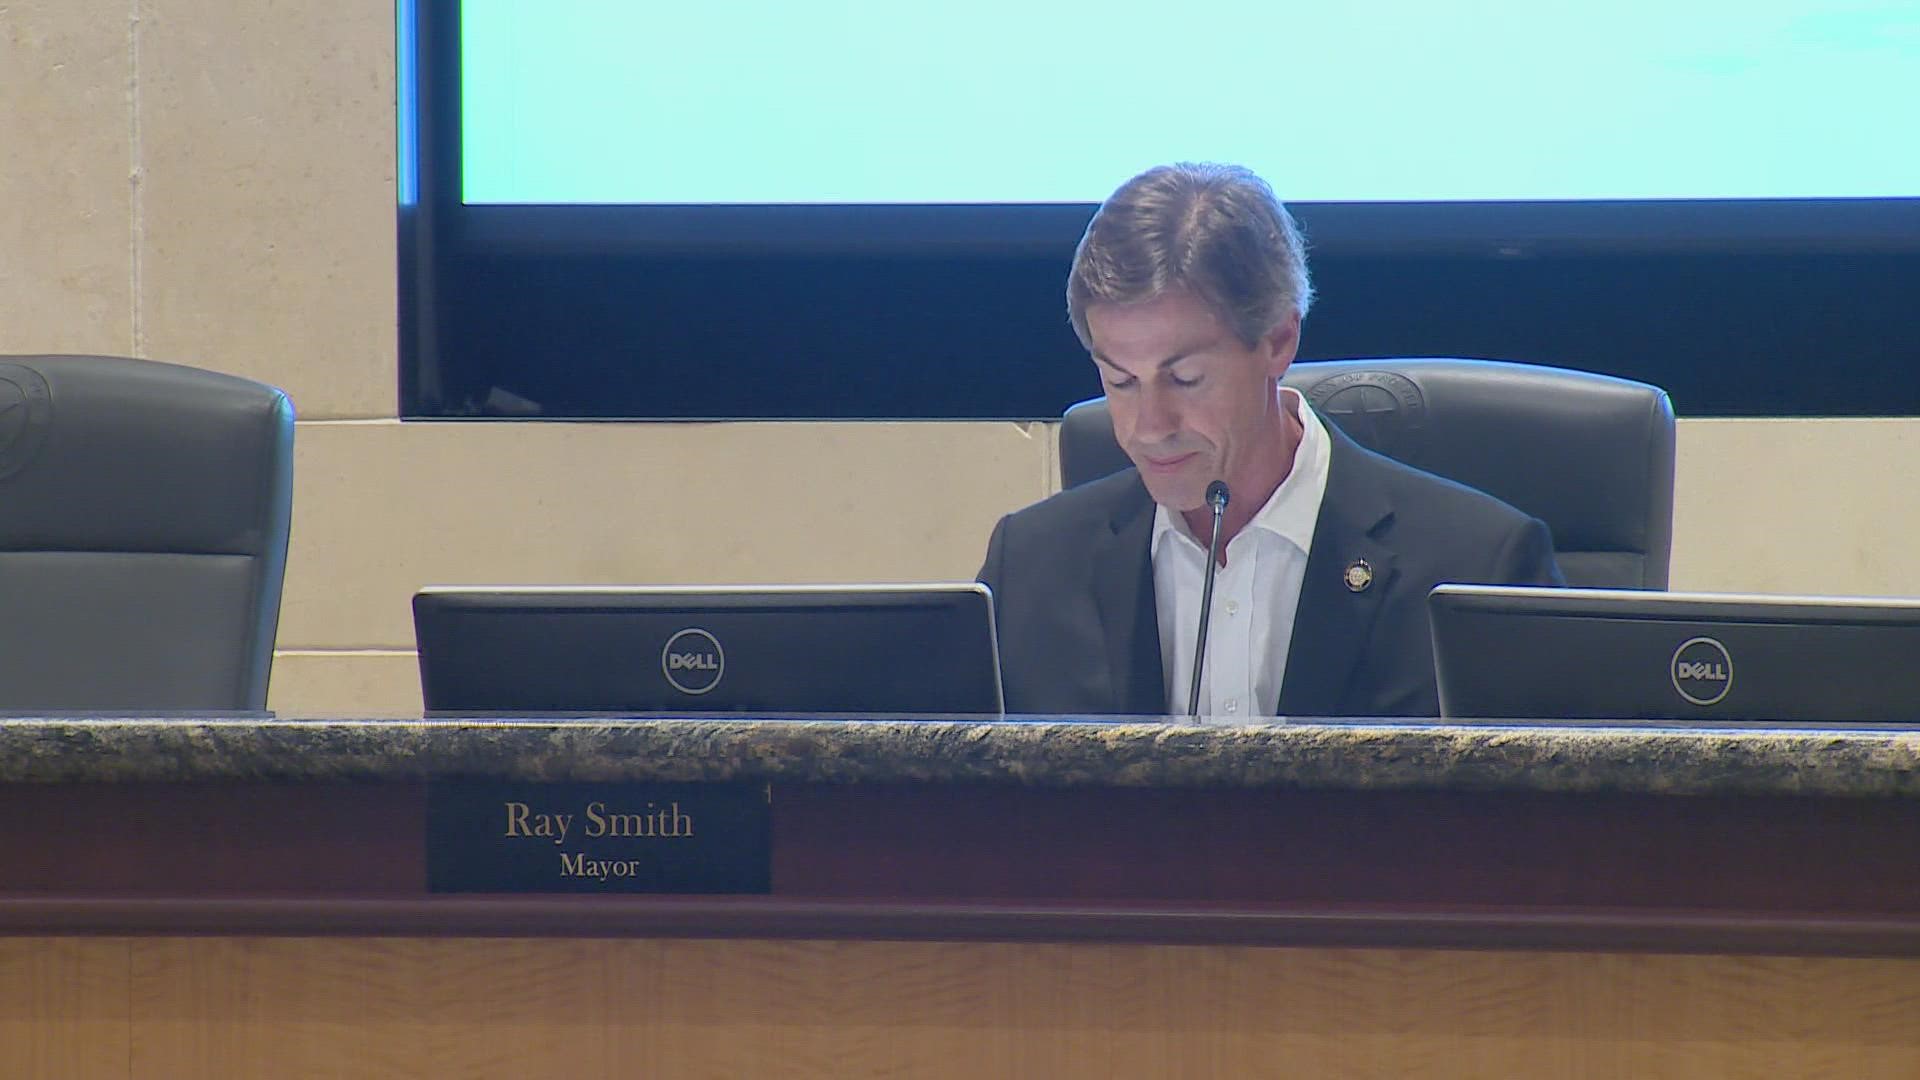 Mayor Ray Smith told WFAA he was unaware a motorcyclist rear-ended him, thinking another vehicle had. He says he left the accident to chase after that car instead.